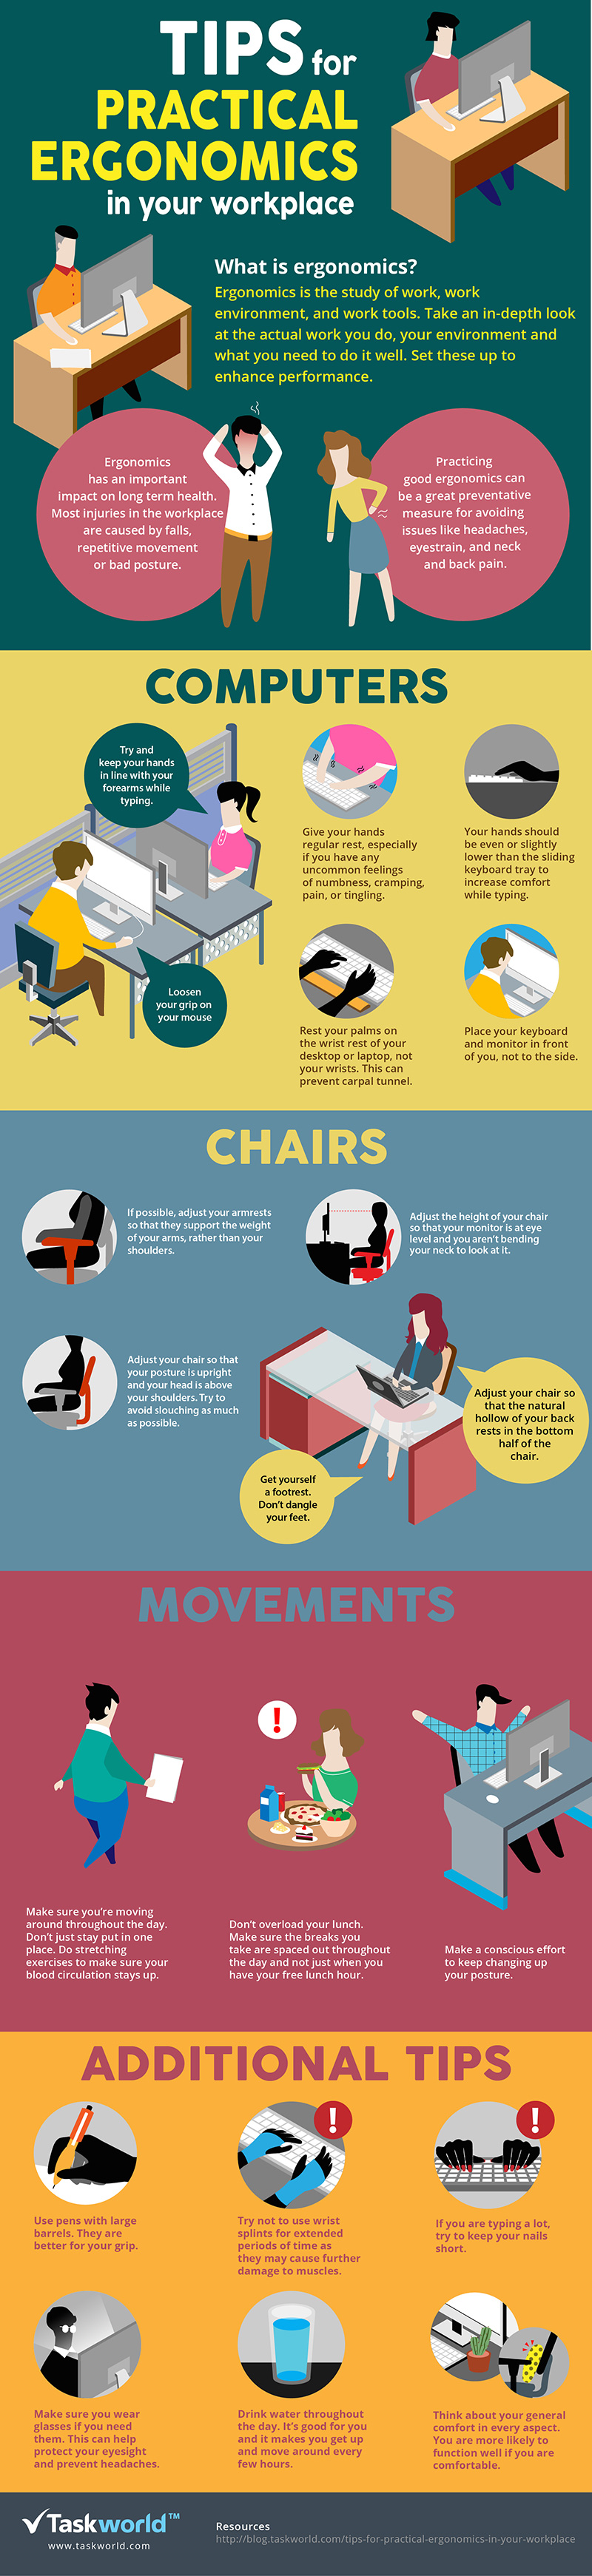 Tips for Practical Ergonomics In Your Workplace